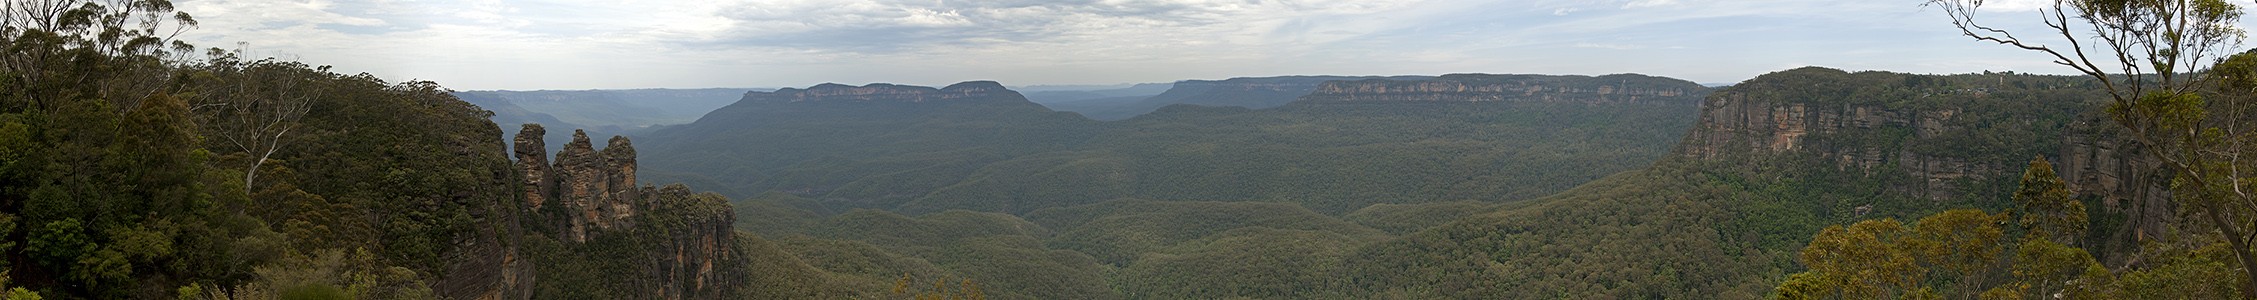 Katoomba Blick vom Echo Point Lookout: Blue Mountains National Park